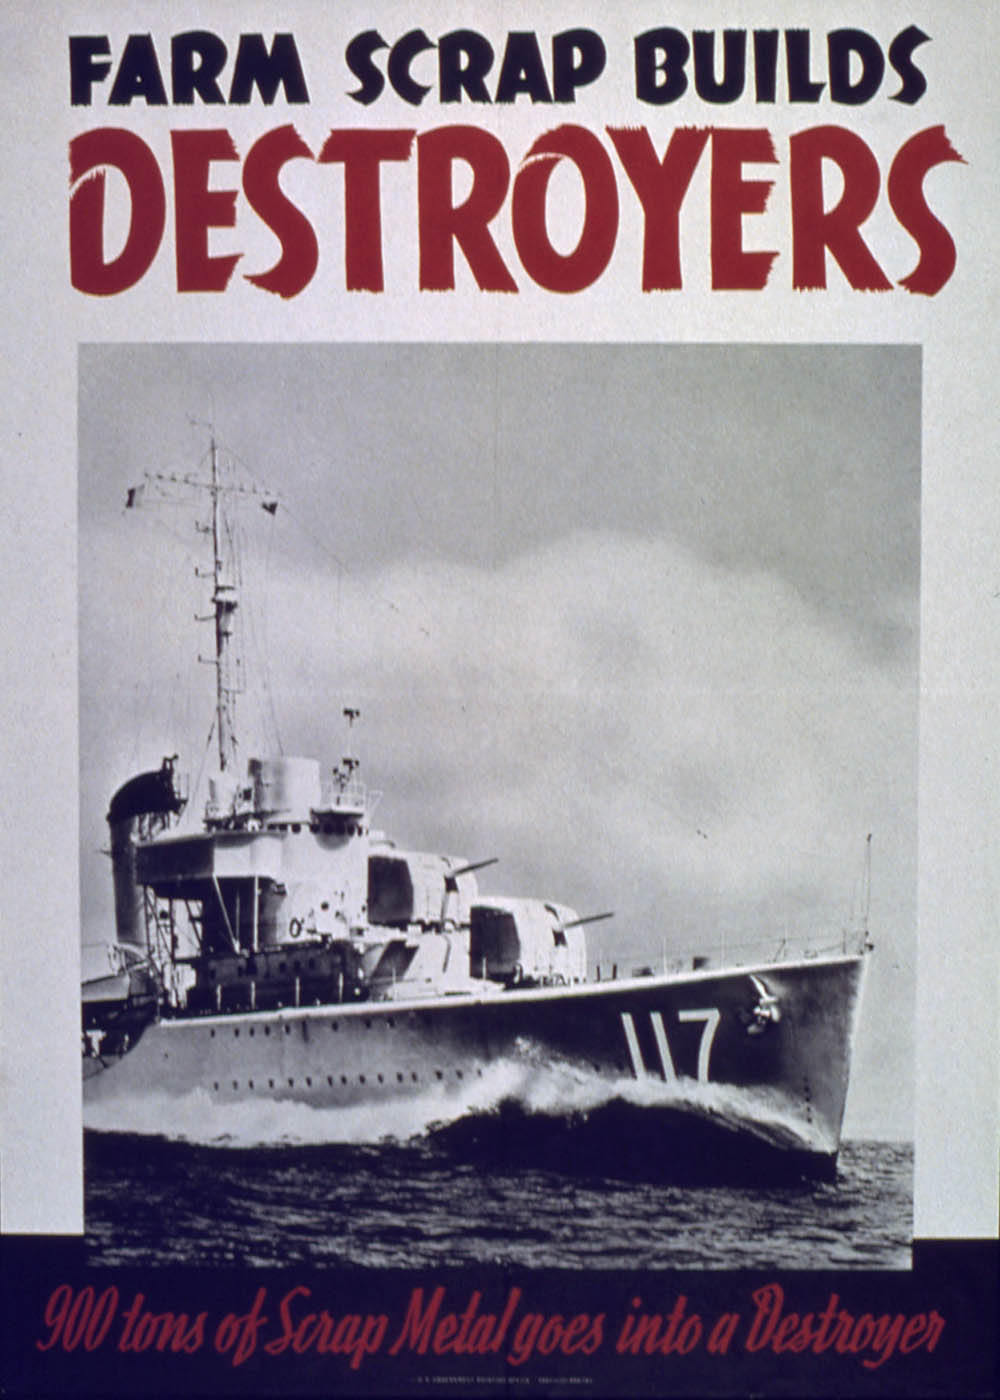 Farm Scrap Builds Destroyers: 900 tons of Scrap Metal goes into a Destroyer, WWII Poster. (Office for Emergency Management, Office of War Information.)